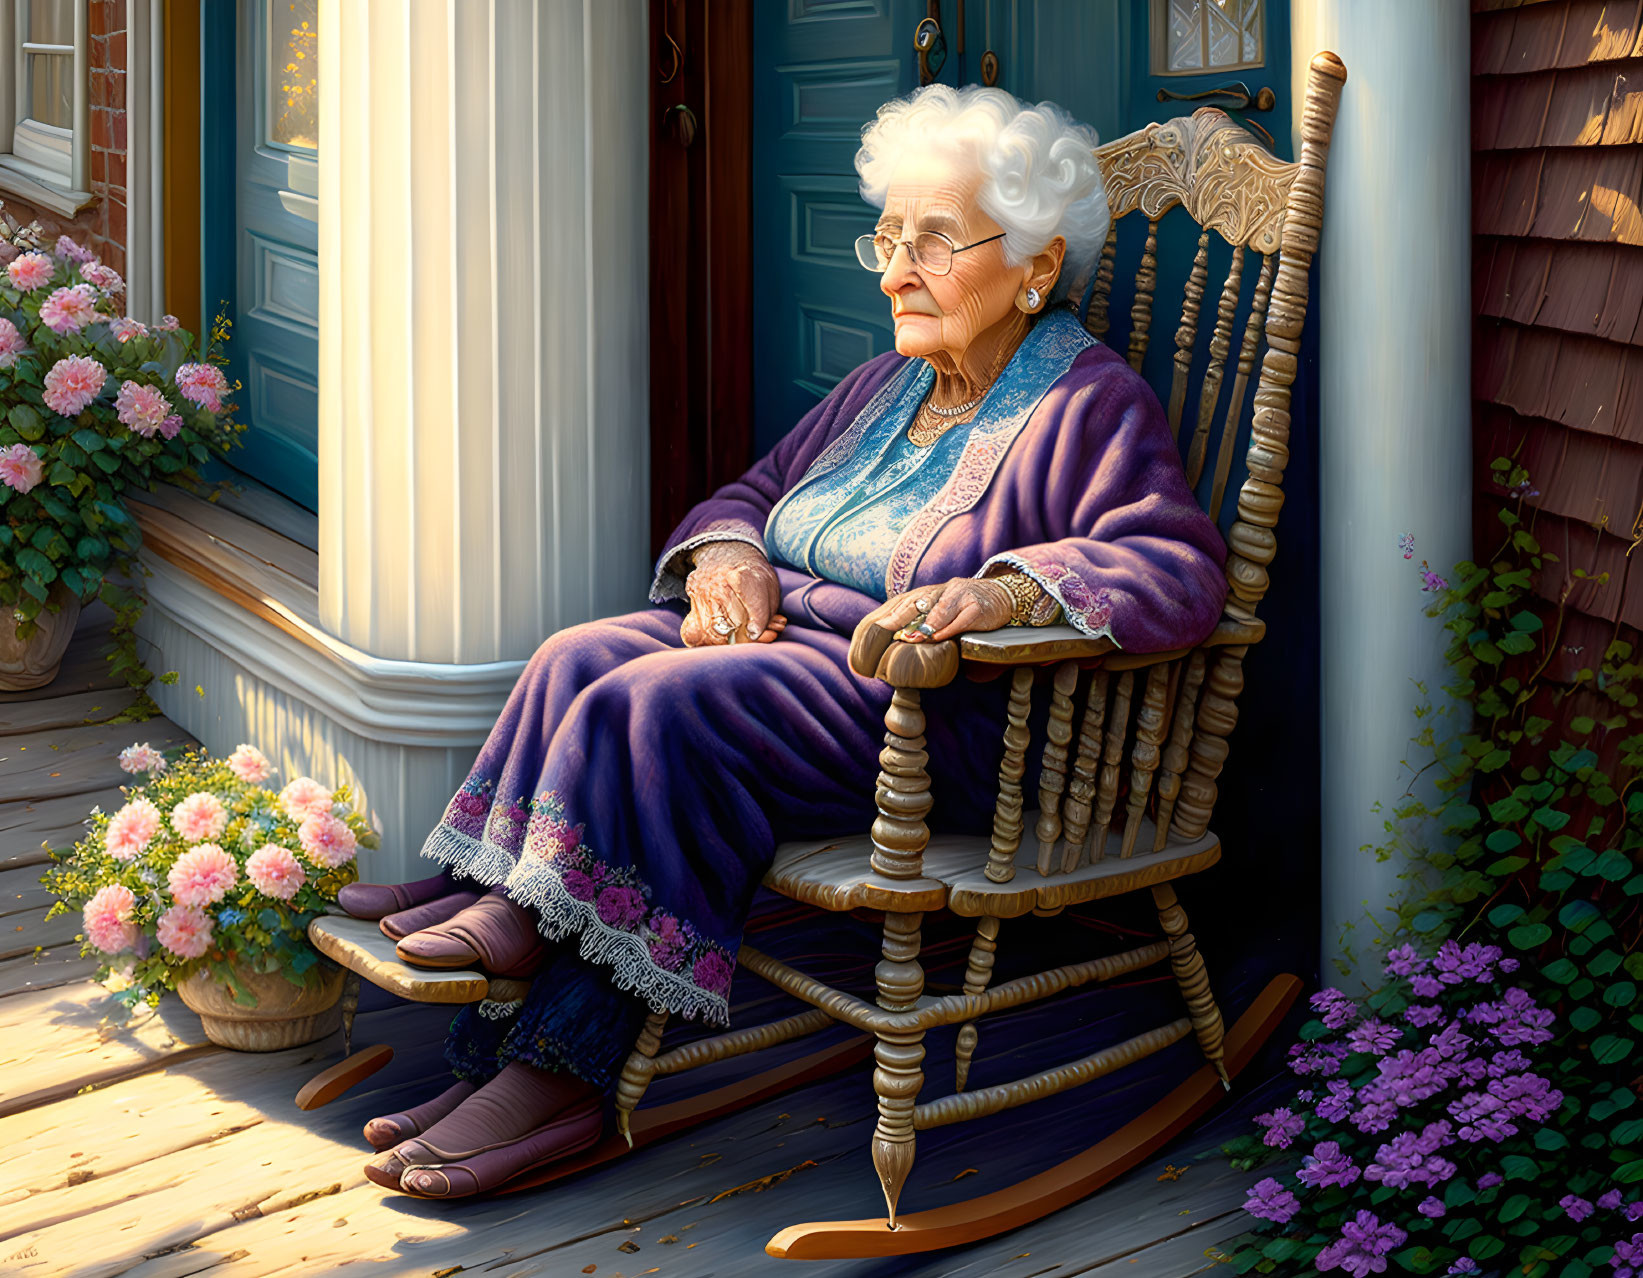 Elderly lady with white hair sitting on a porch with blooming flowers